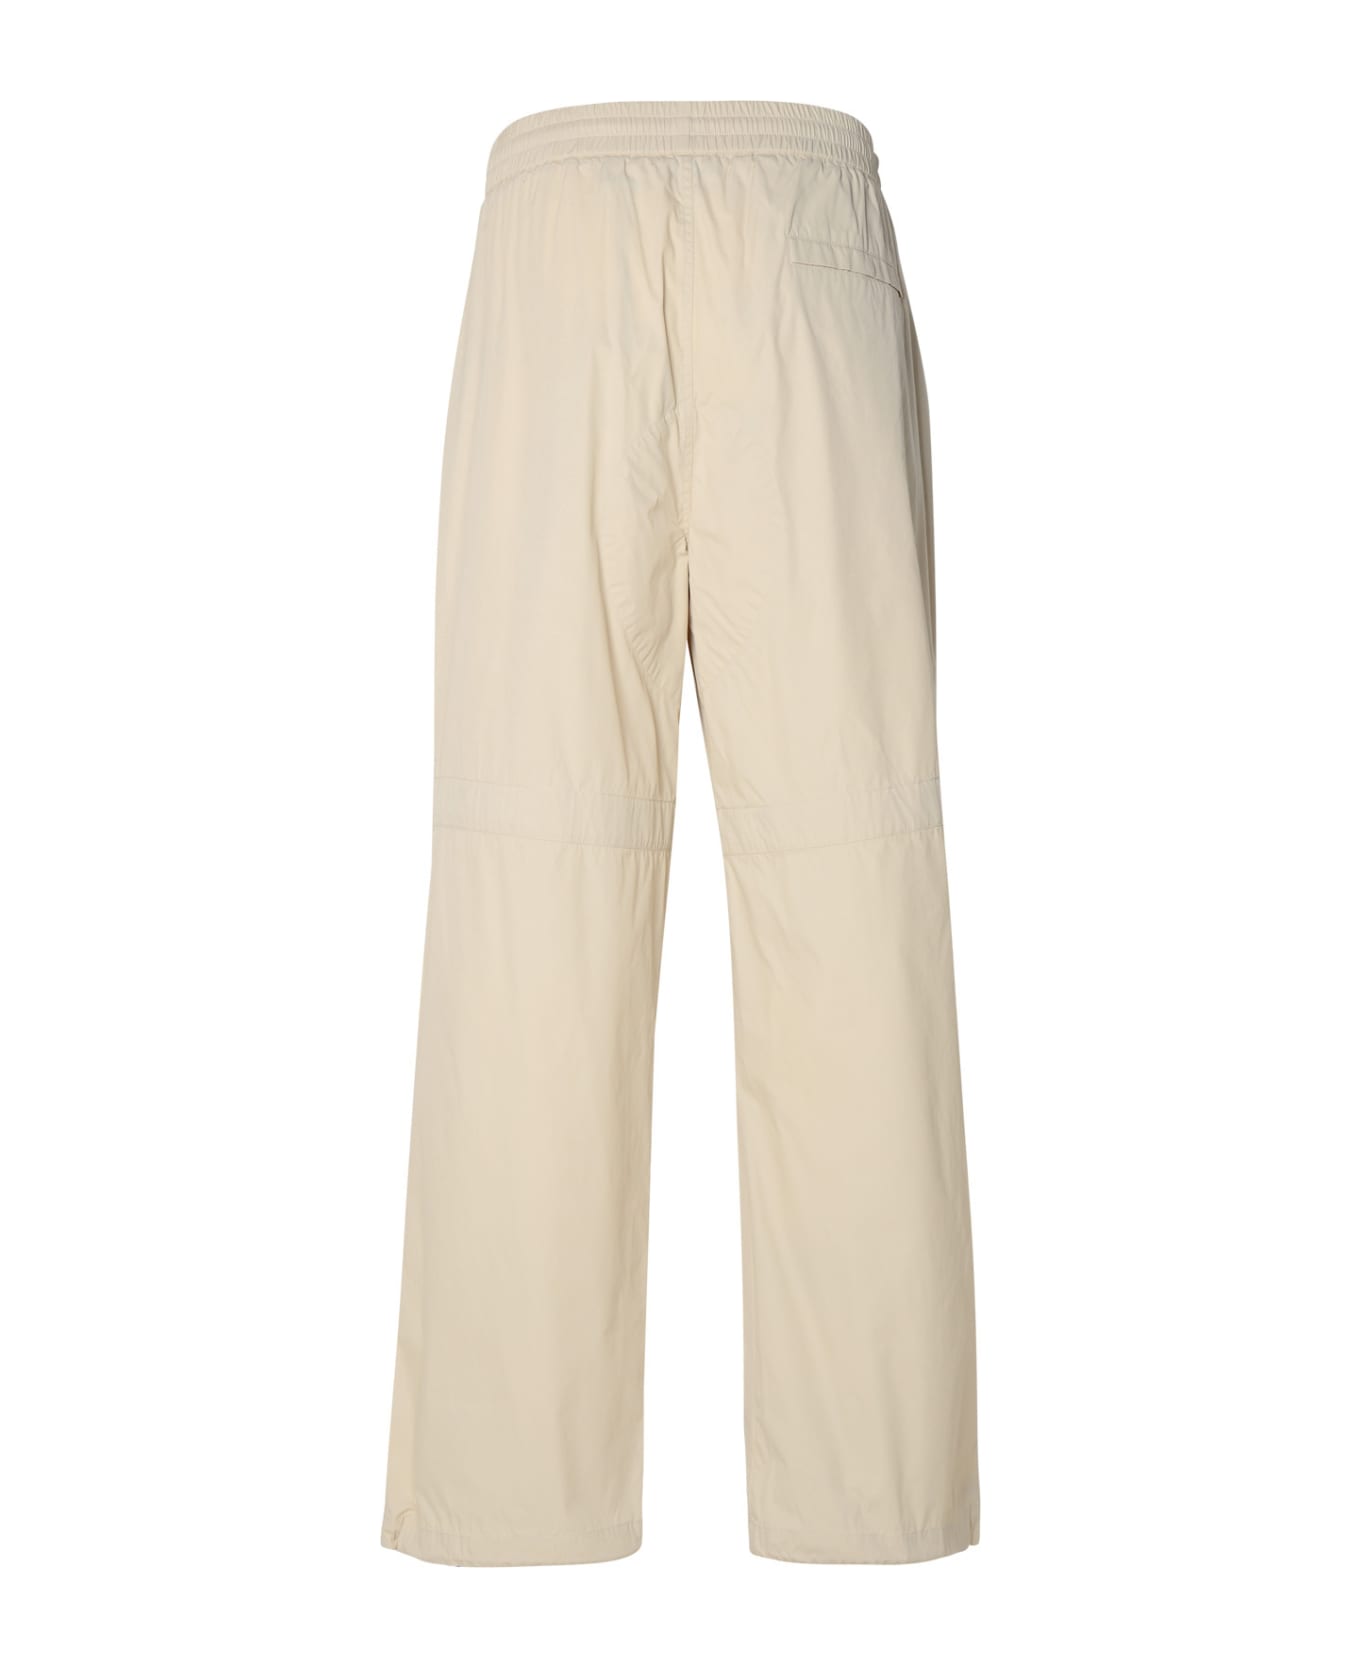 Burberry Beige Cotton Blend Trousers - Wheat